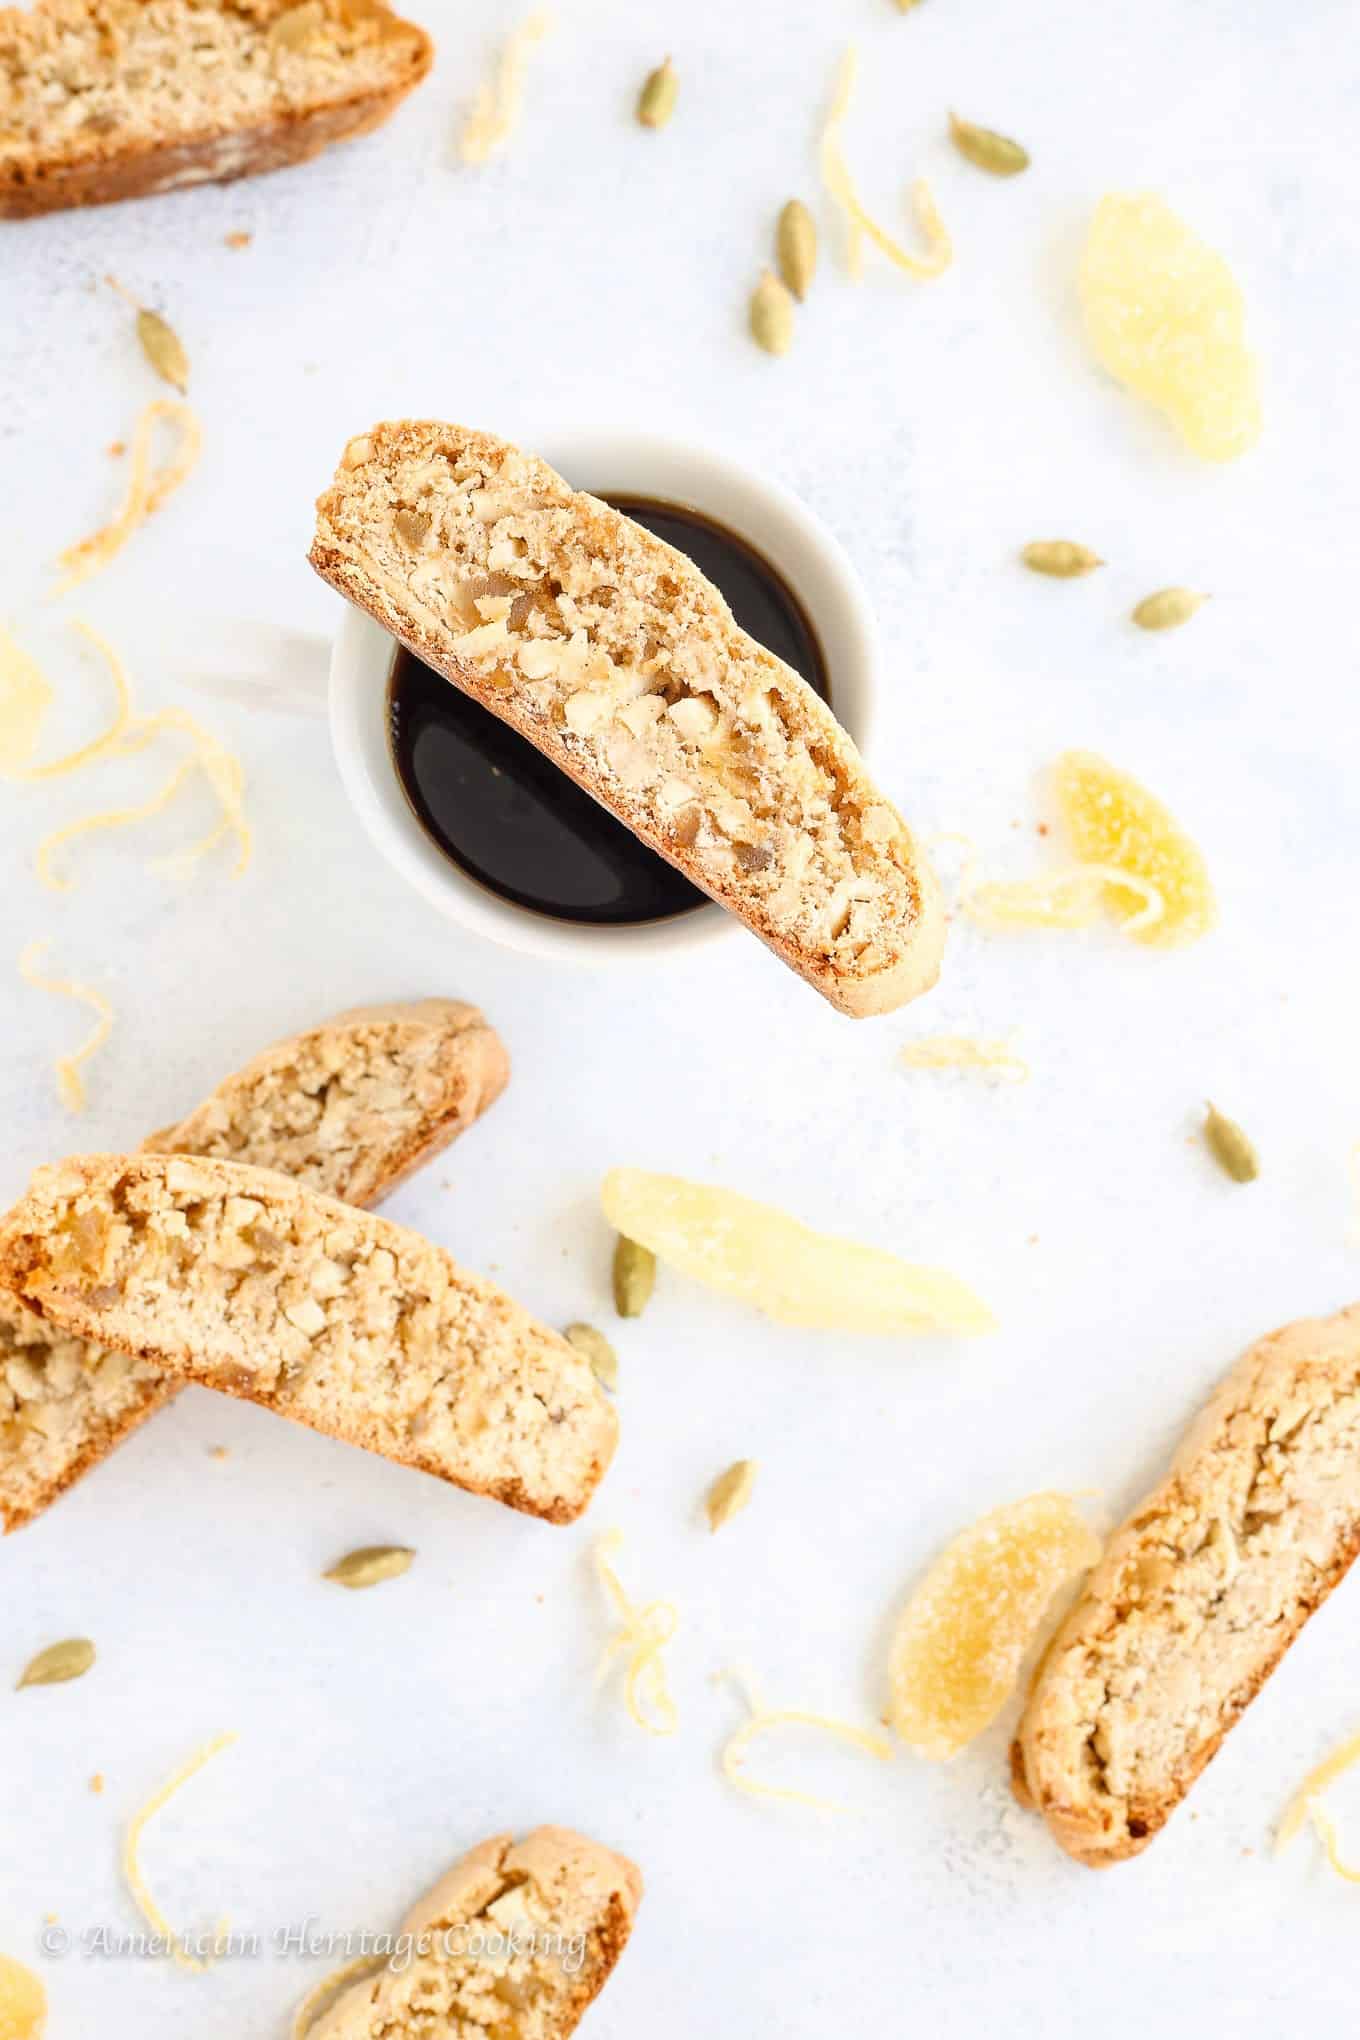 These sensational Ginger Orange Almond Biscotti are a little bit spicy and bit sweet! They have notes of ginger, orange, cardamom and cinnamon all baked to crispy perfection. Perfect for dunking in coffee or just snacking! 